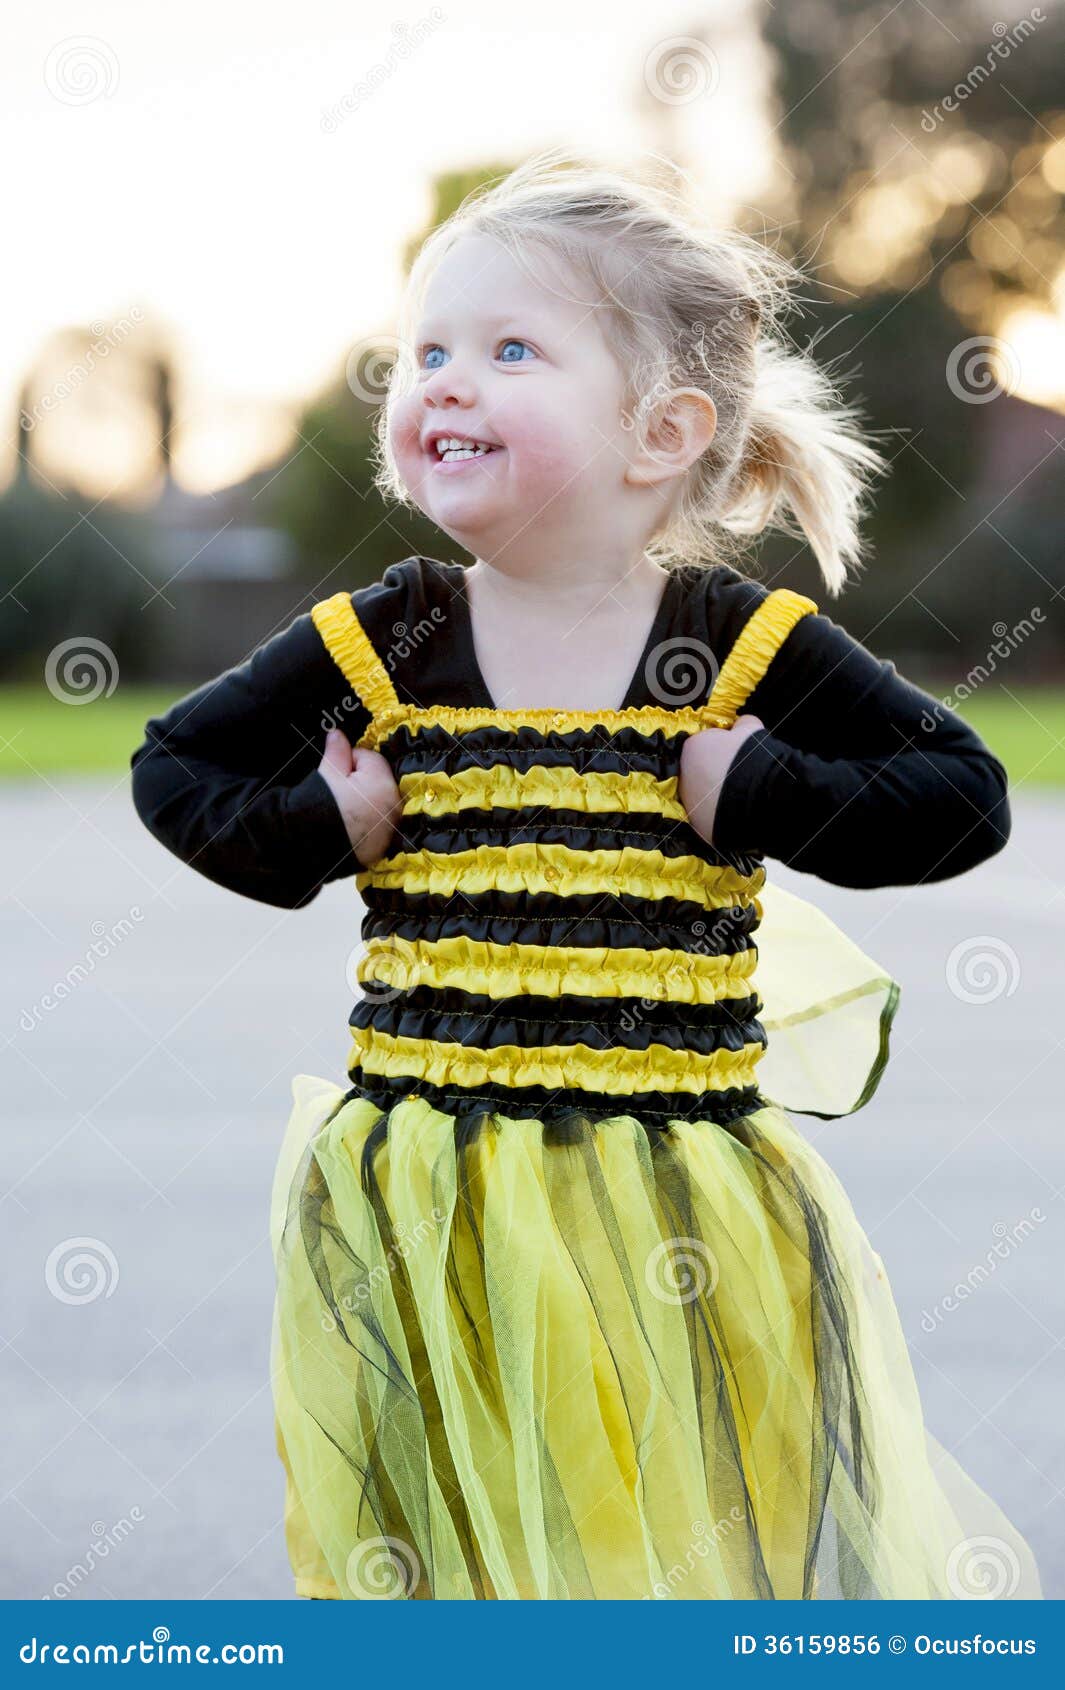 little blond girl in bee costume dancing outdoors